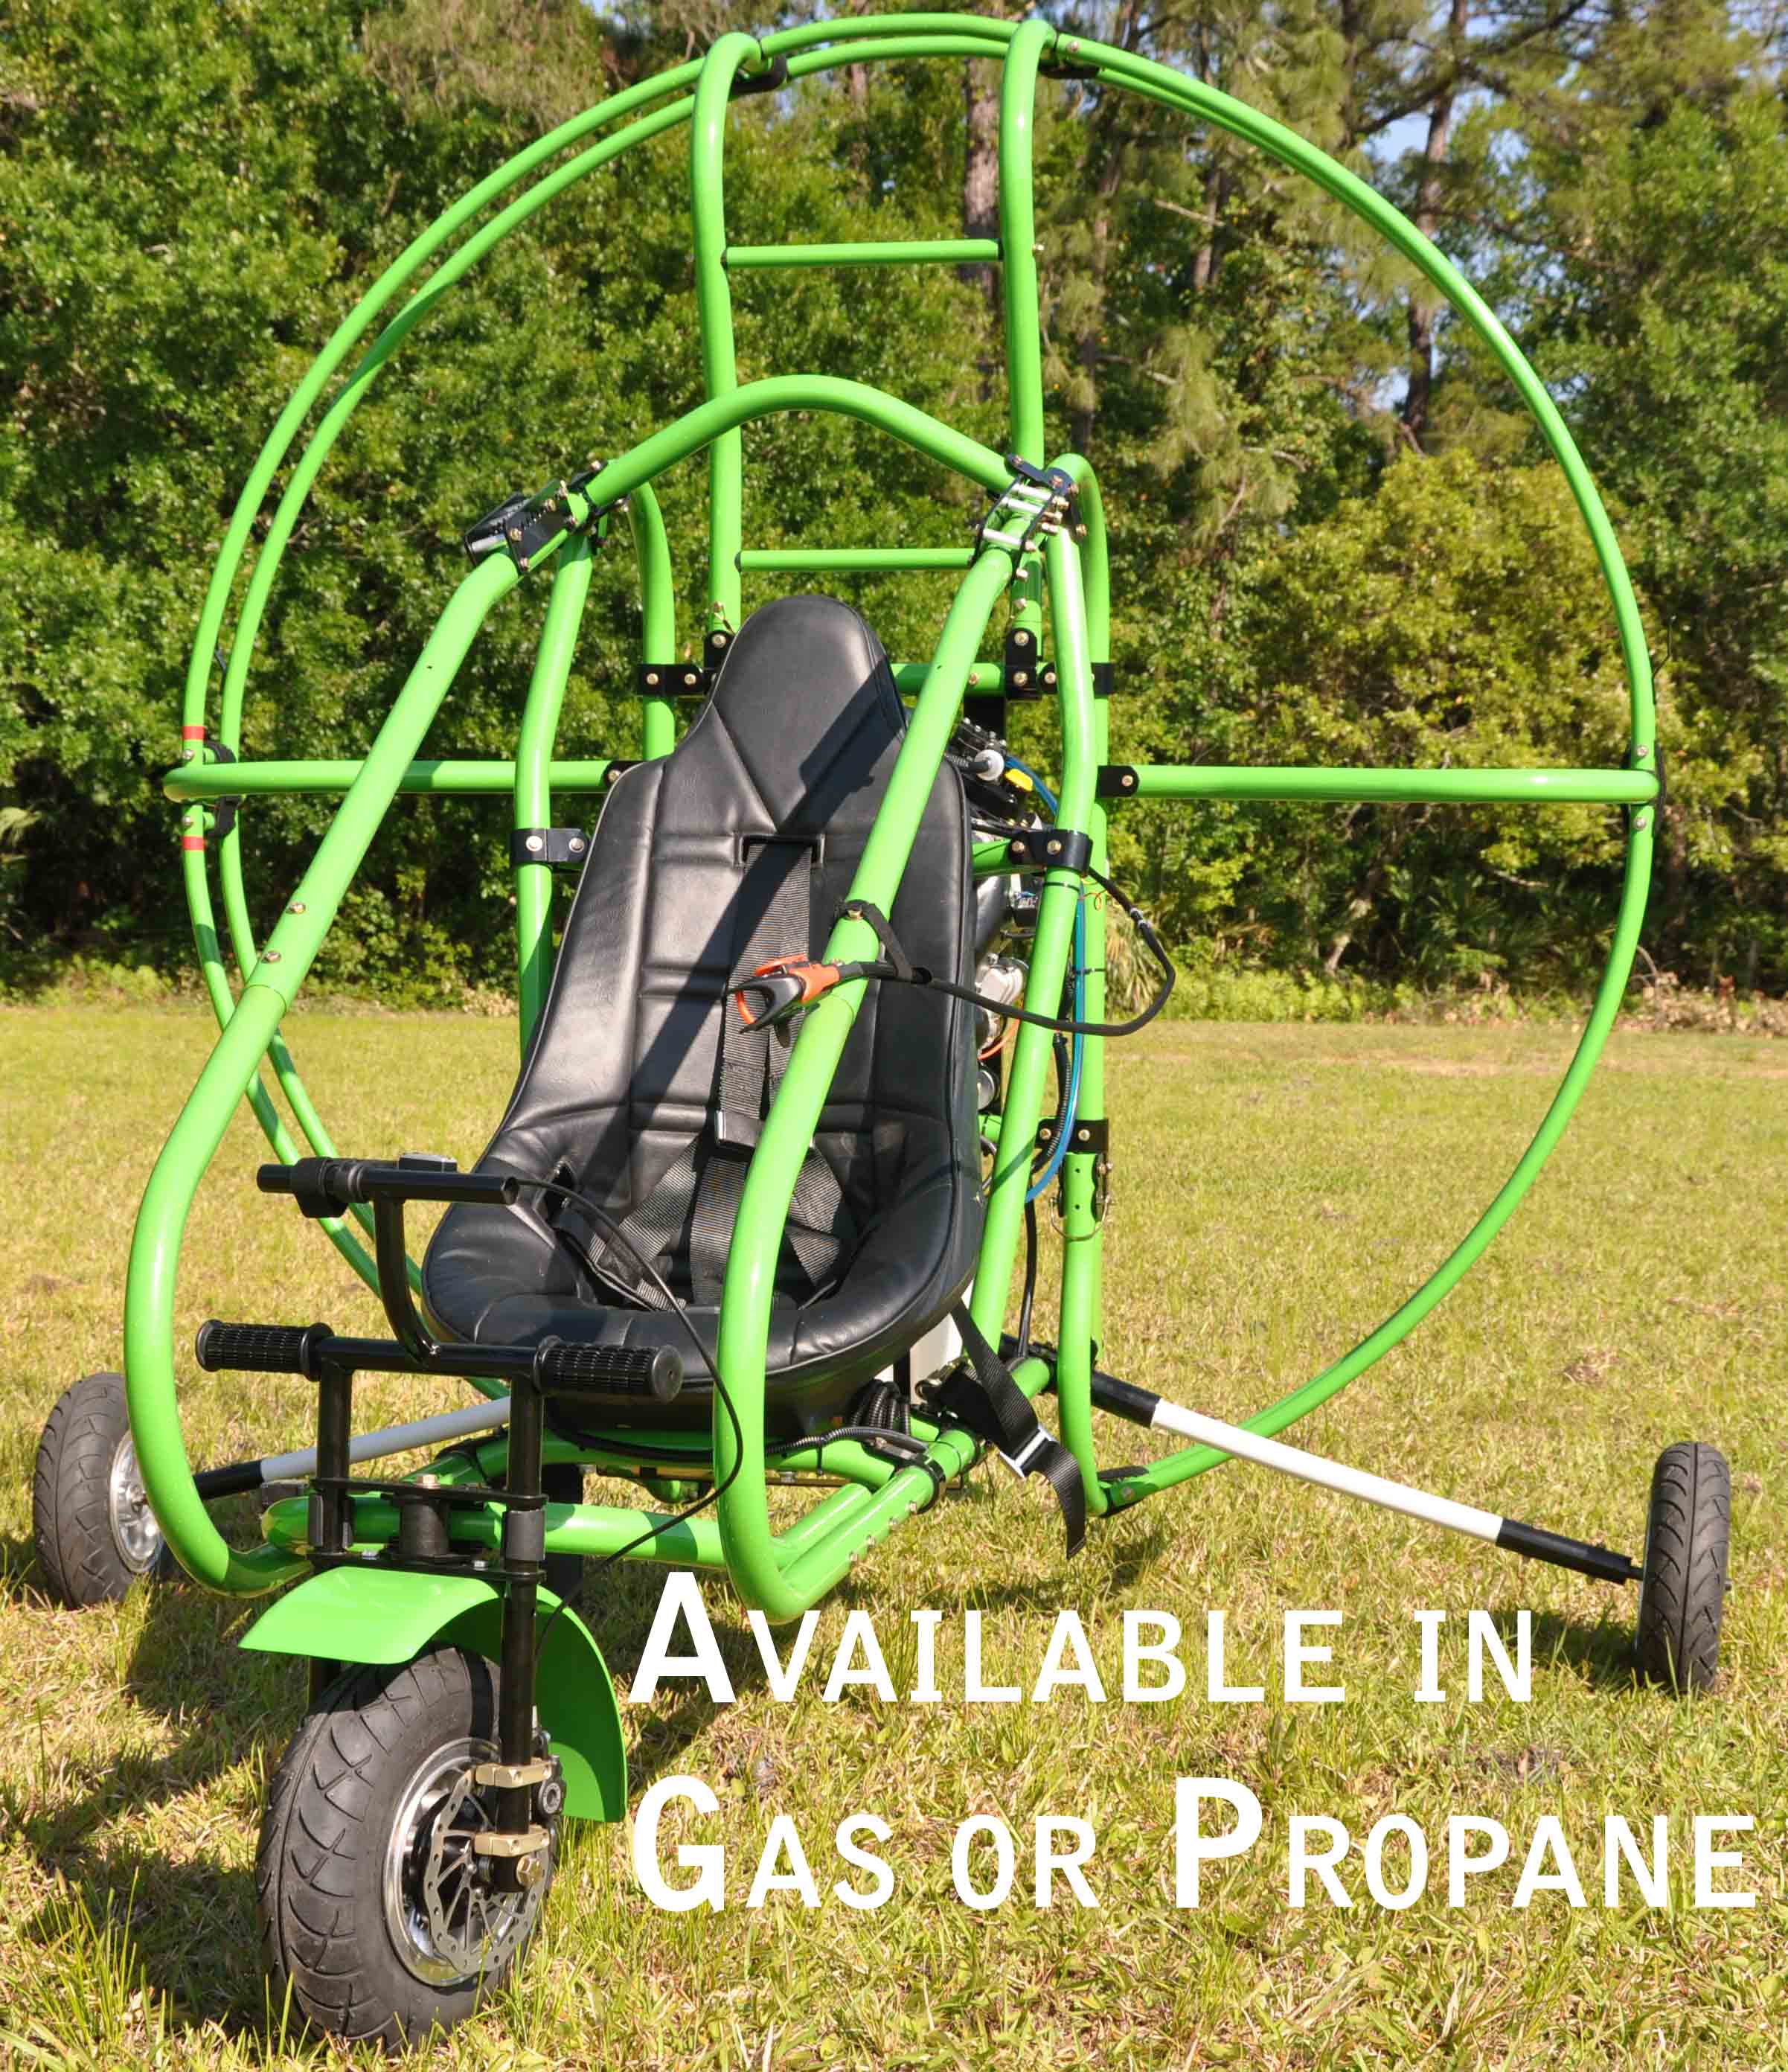 green eagle ppg paramotor for sale Austin tx